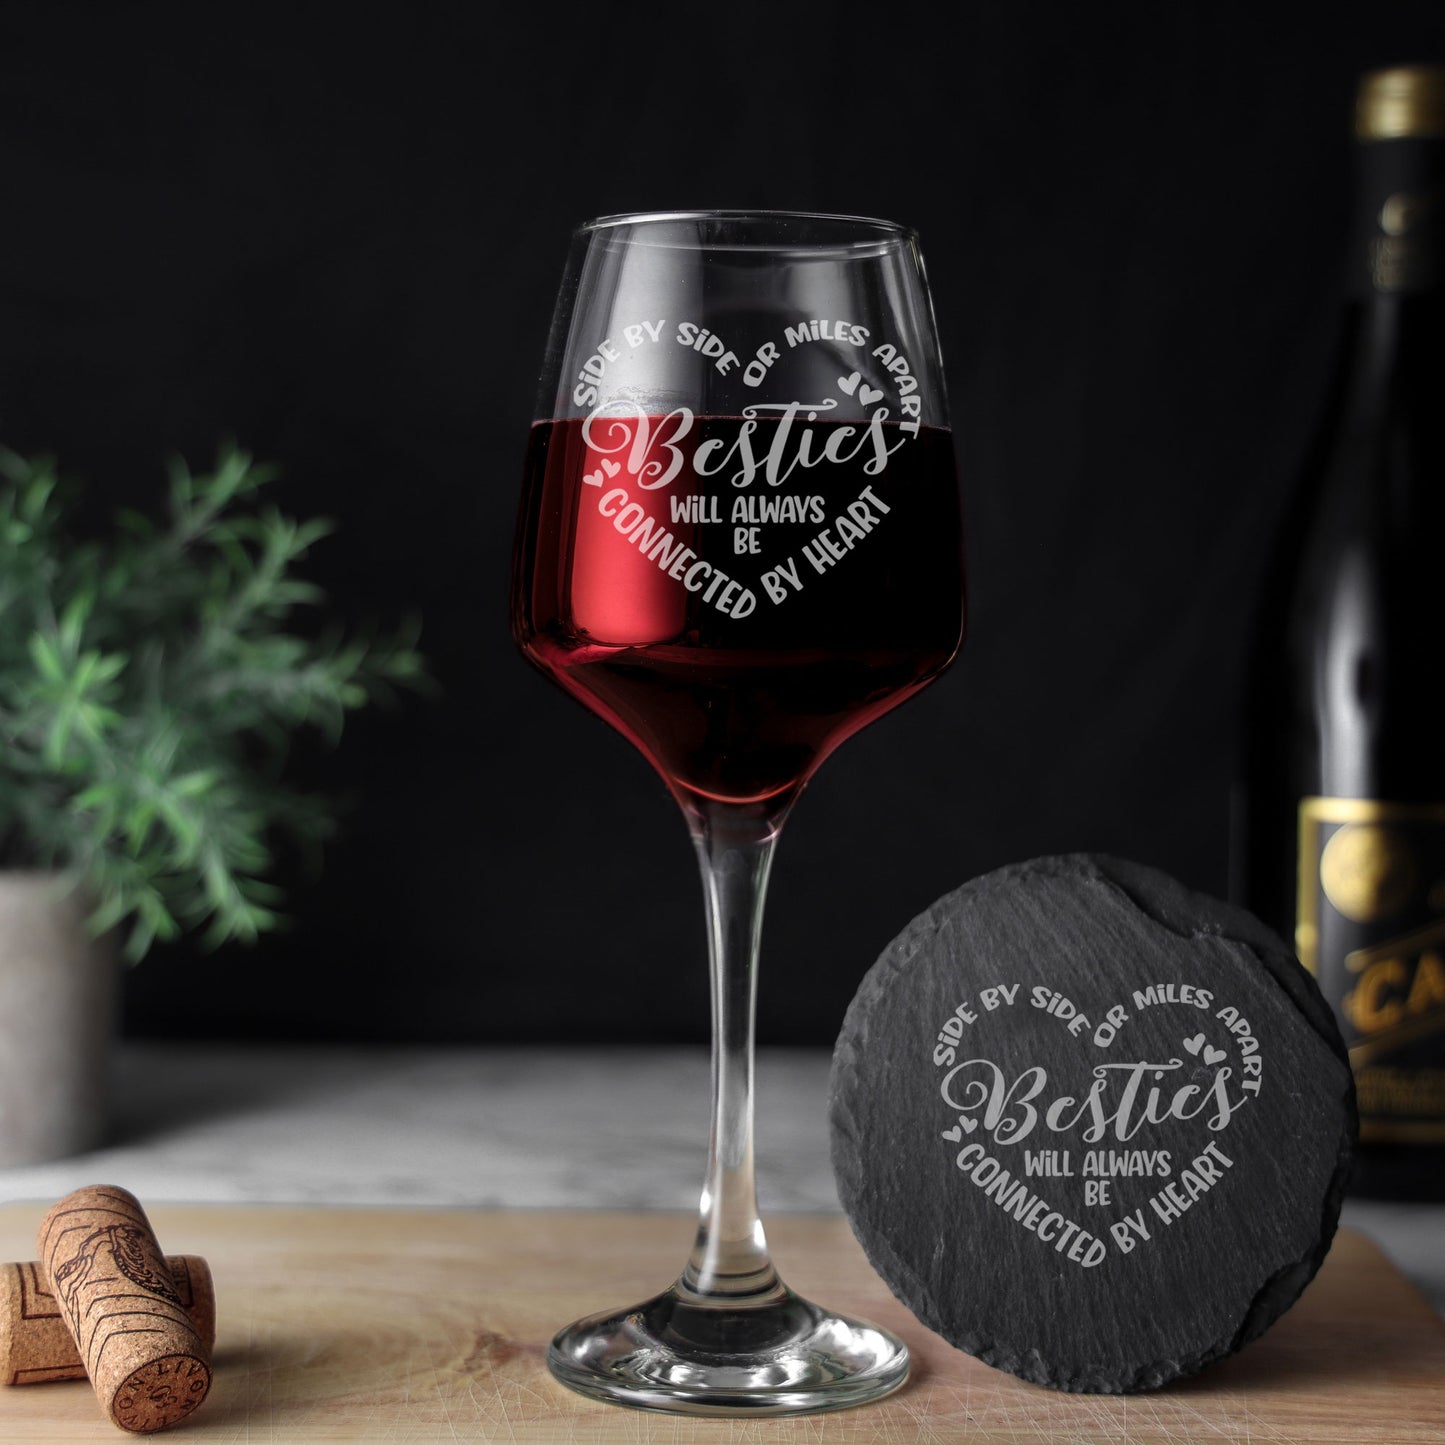 Besties Connected By Heart Engraved Wine Glass and/or Coaster Set  - Always Looking Good - Glass & Round Coaster Set  